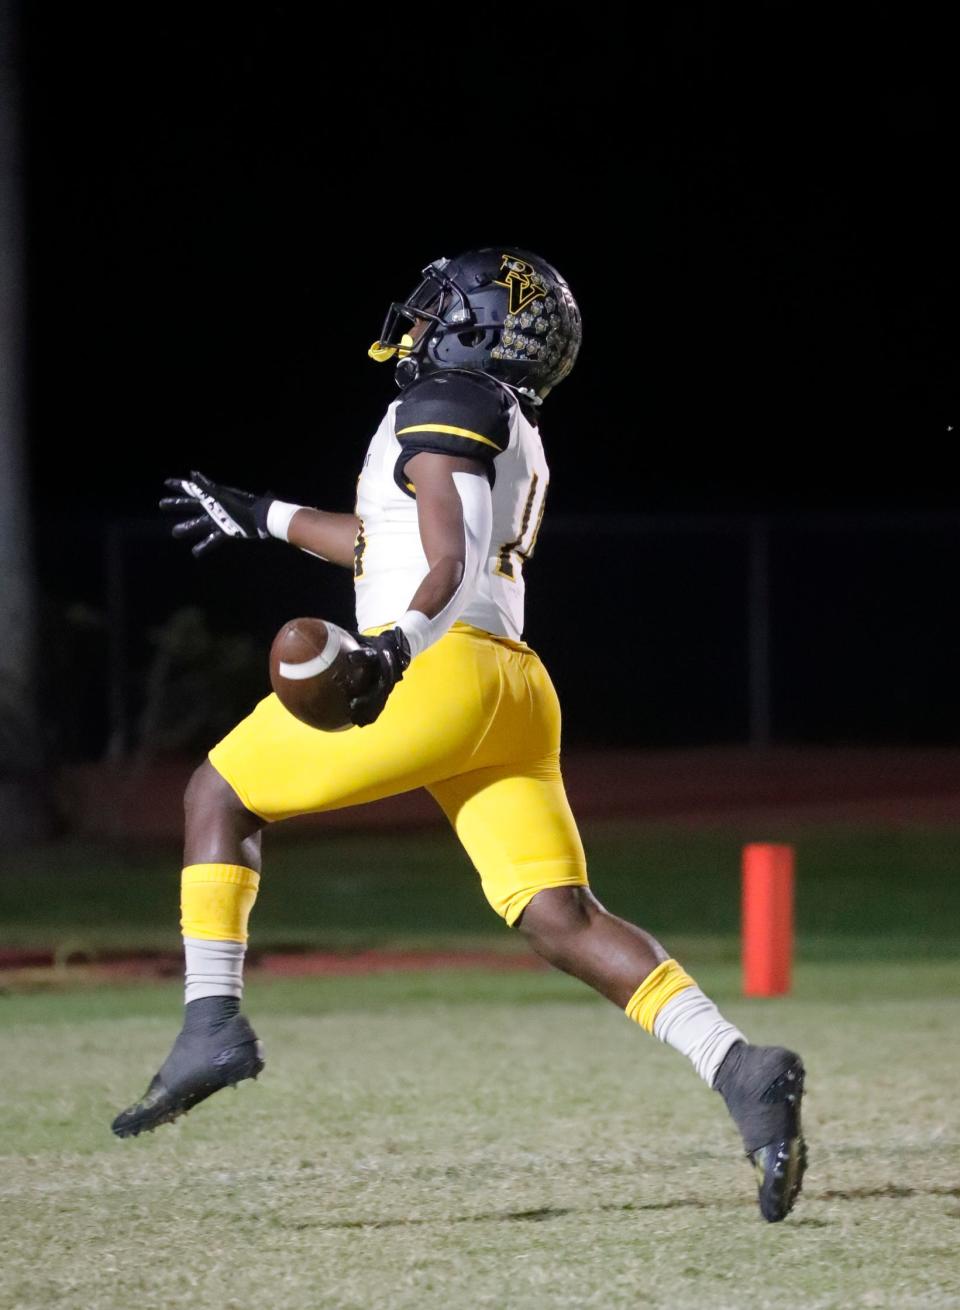 Verot rusher Deshon Jenkins Jr. scores a touchdown in the first quarter. The Bishop Verot Vikings visited the Estero High School Wildcats Friday, October 28, 2022 in a week 10 rivalry matchup.